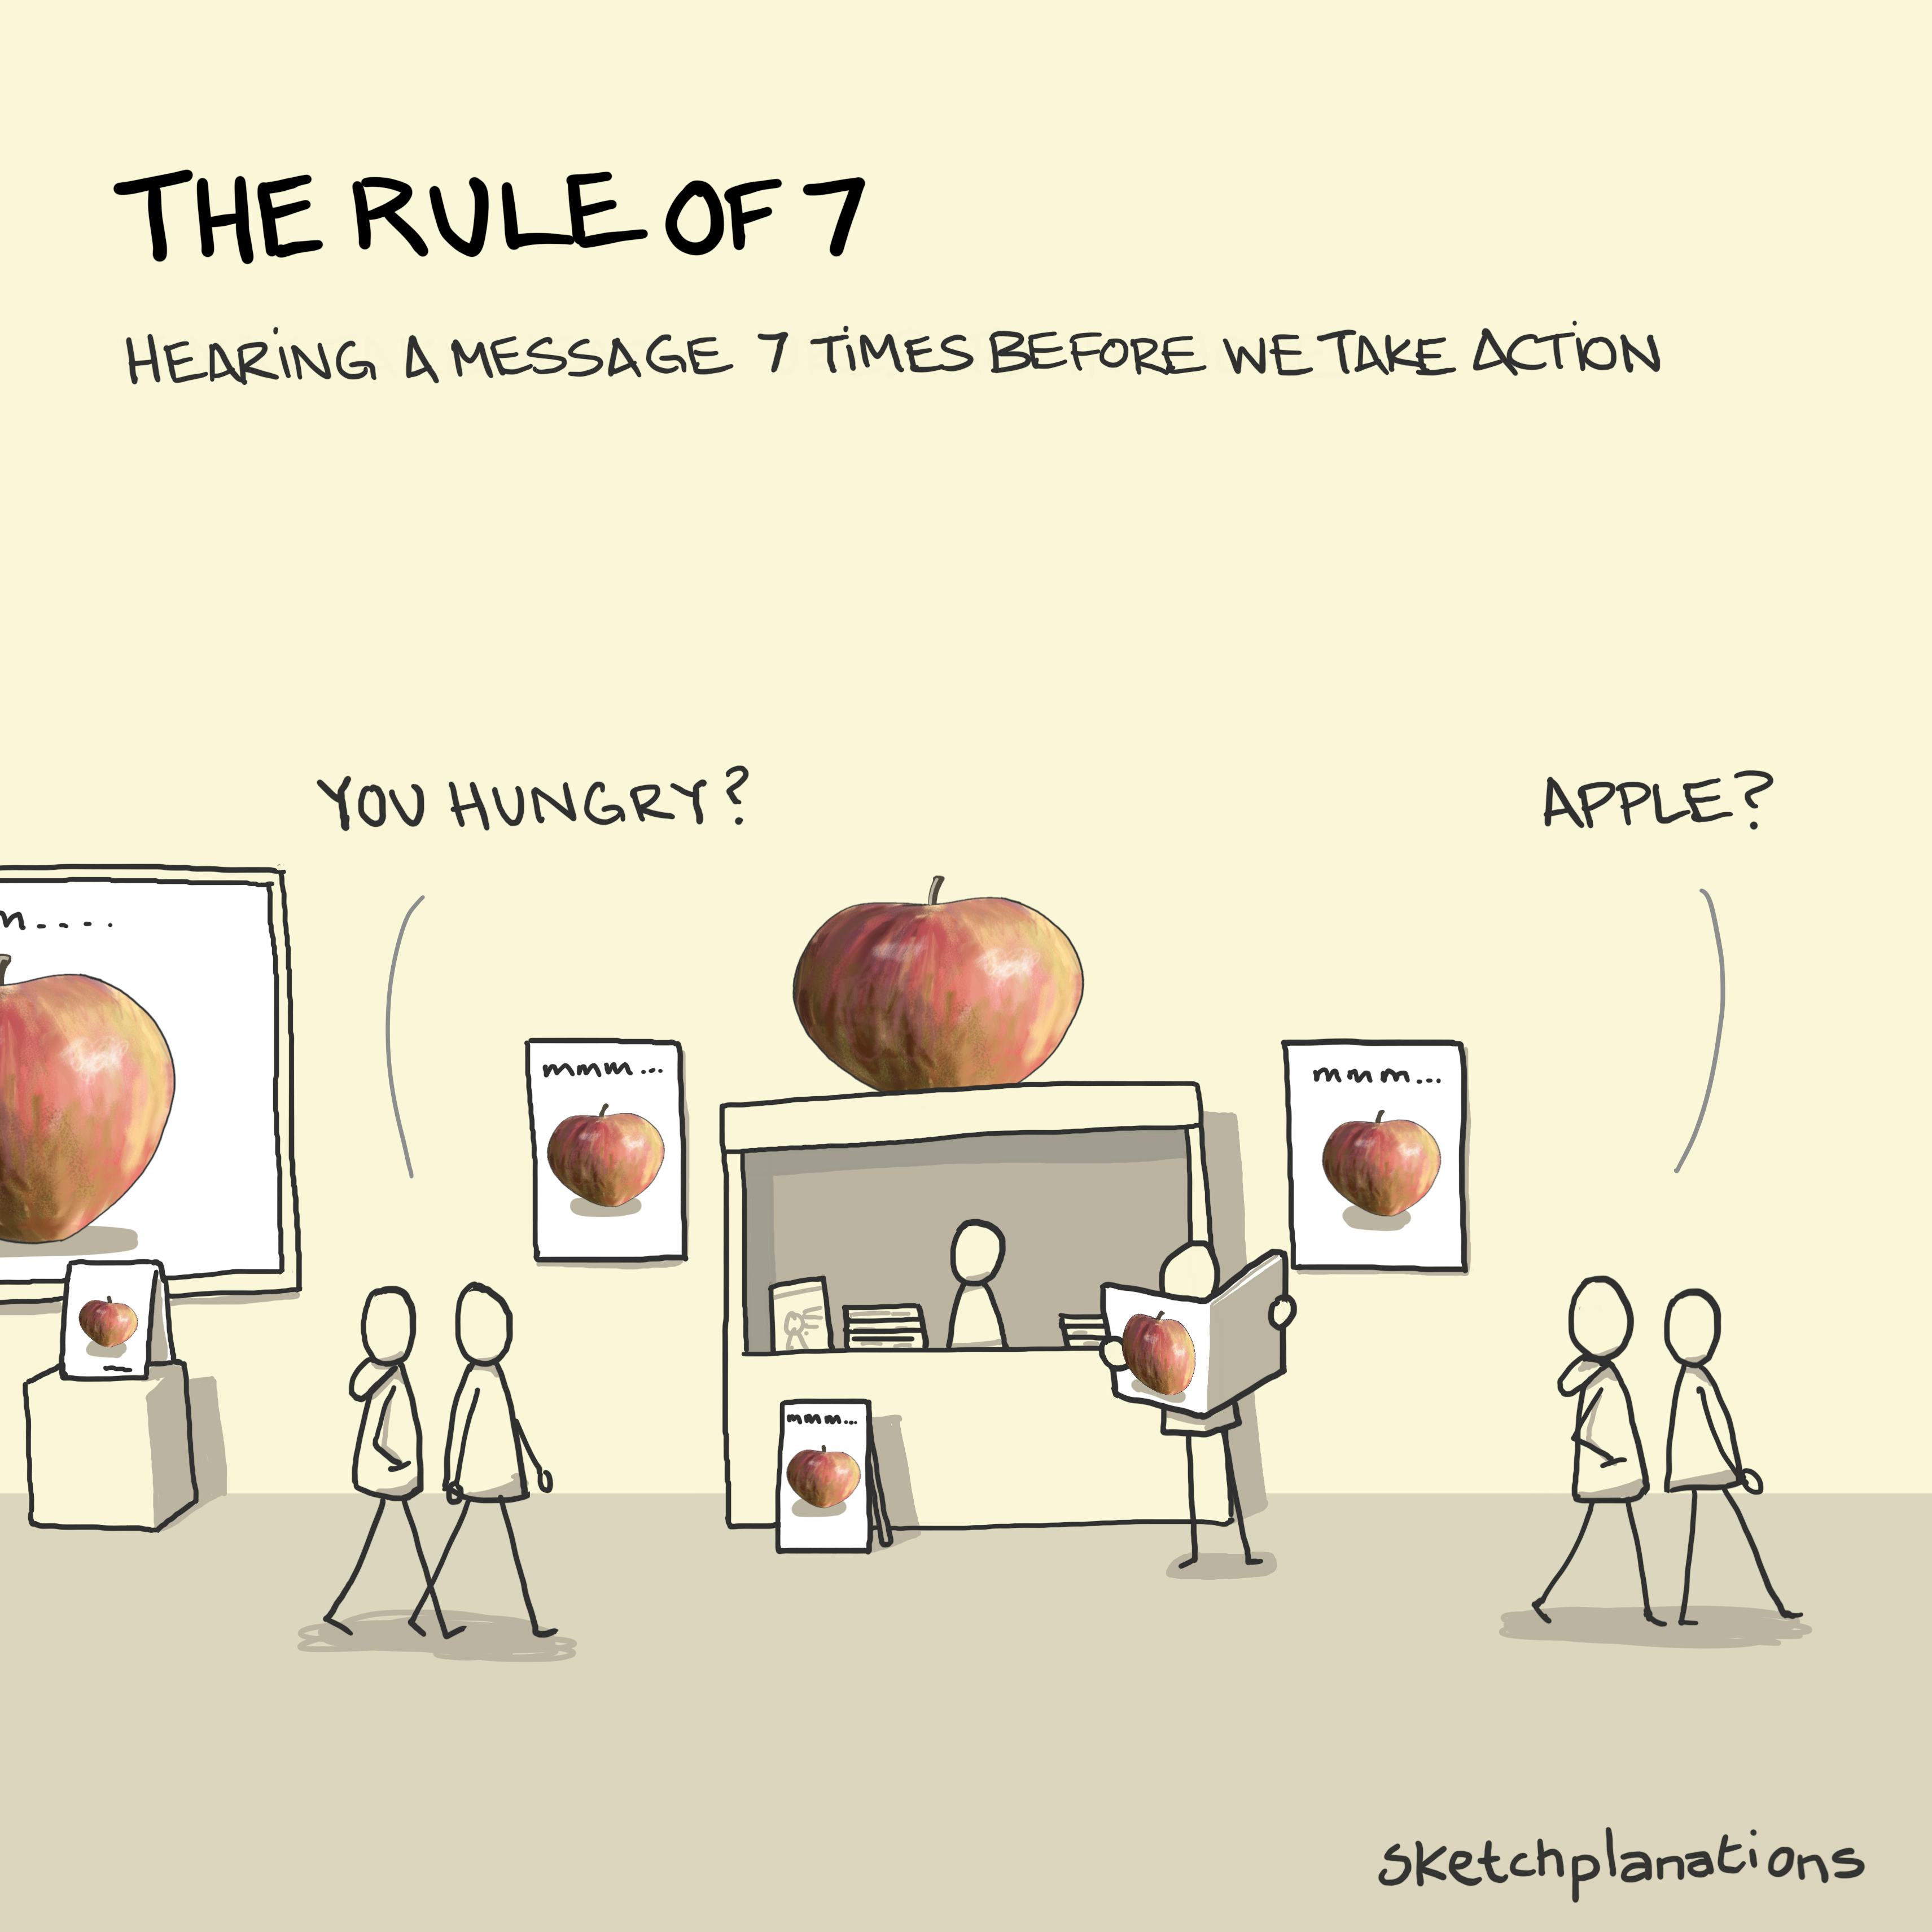 The Rule of 7 illustration: two people walk together along the street, bombarded by imagery of apples; on posters, on the front page of newspapers, by a large promotional 3-D apple perched atop a news-stand. By the end of the scene, their conversation about whether they are hungry has turned to one specifically about buying an apple to eat. 